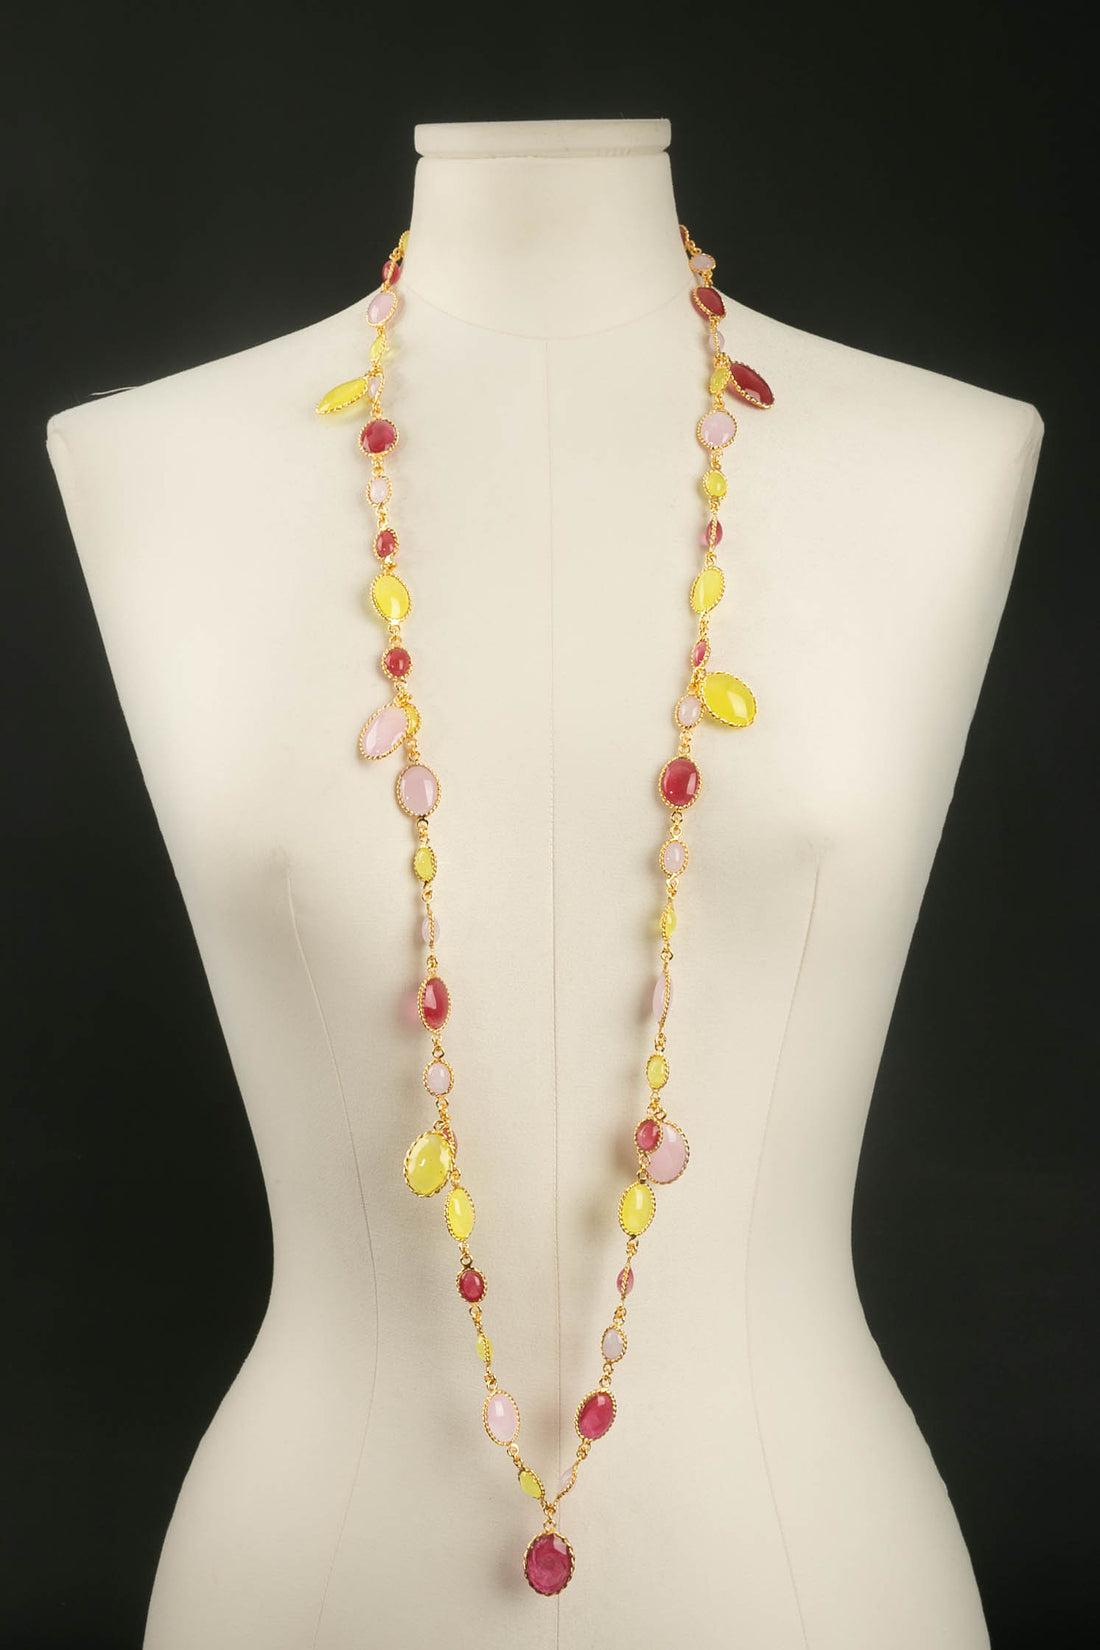 Augustine - Long necklace in gold metal and multicolored glass paste.

Additional information: 
Dimensions: Length: 105.5 cm - Maximum width: 3 cm
Condition: Very good condition
Seller Ref number: BC265